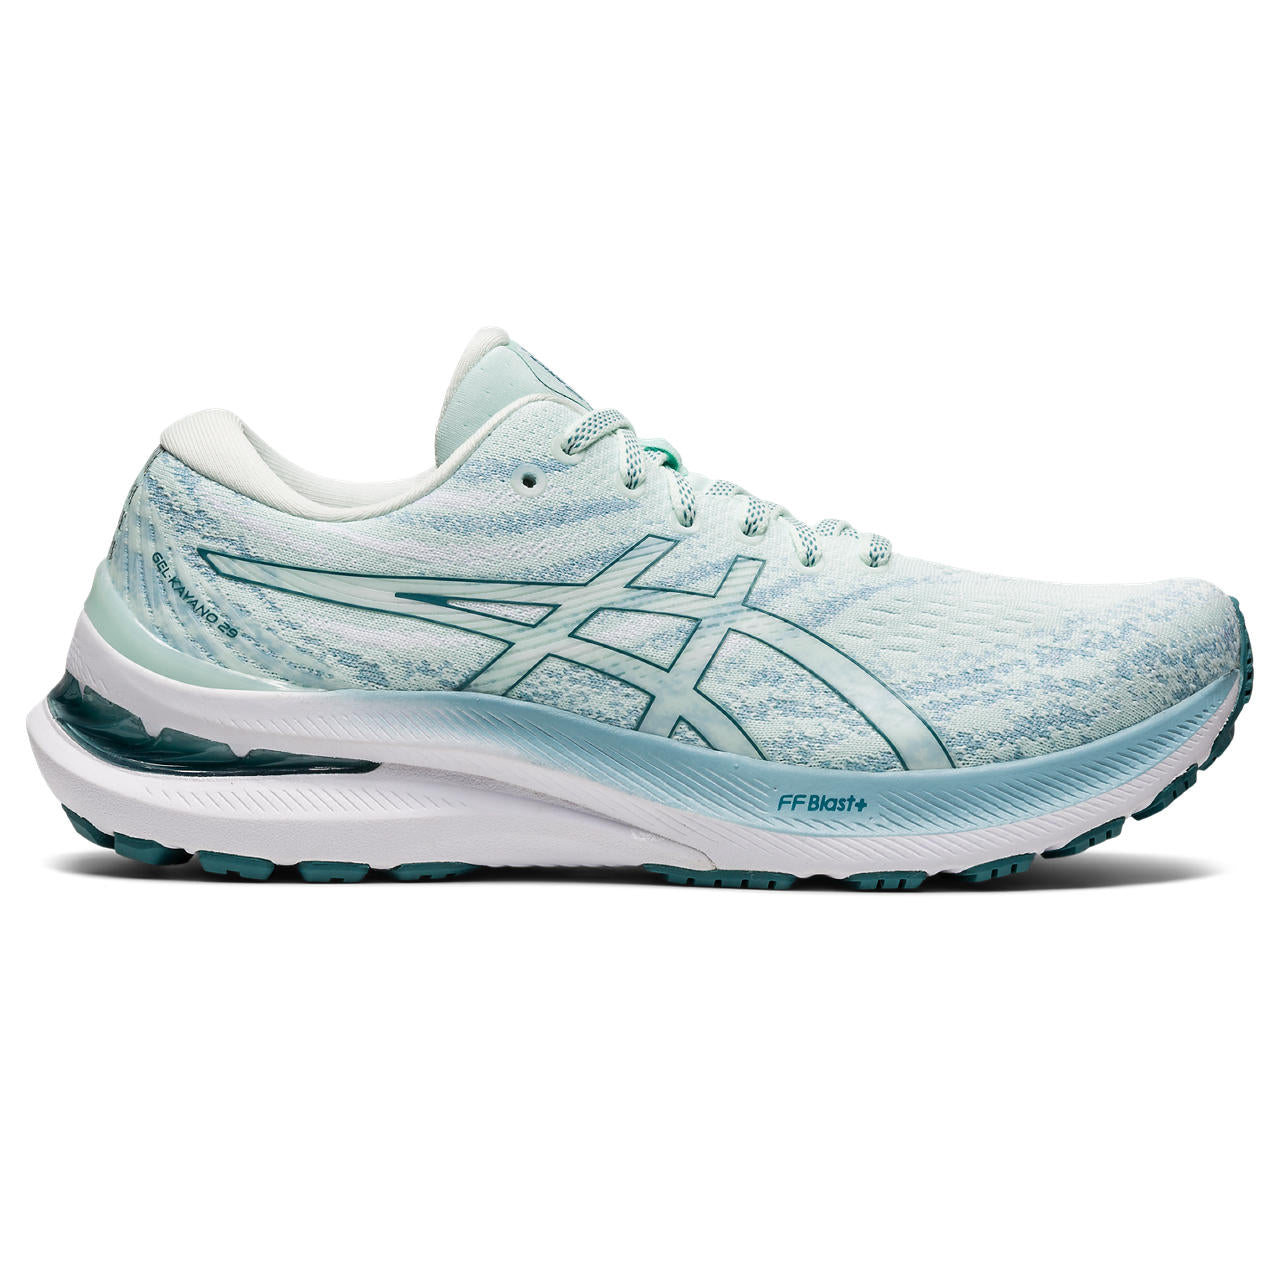 The Gel-Kayano 29 creates a stable running experience and a more responsive feel underfoot. Featuring a low-profile external heel counter, this piece comfortably cradles your foot with advanced rearfoot support. Asics also updated the midsole with FF BLAST PLUS cushioning.  This product is the color Soothing Sea / Misty Pine.